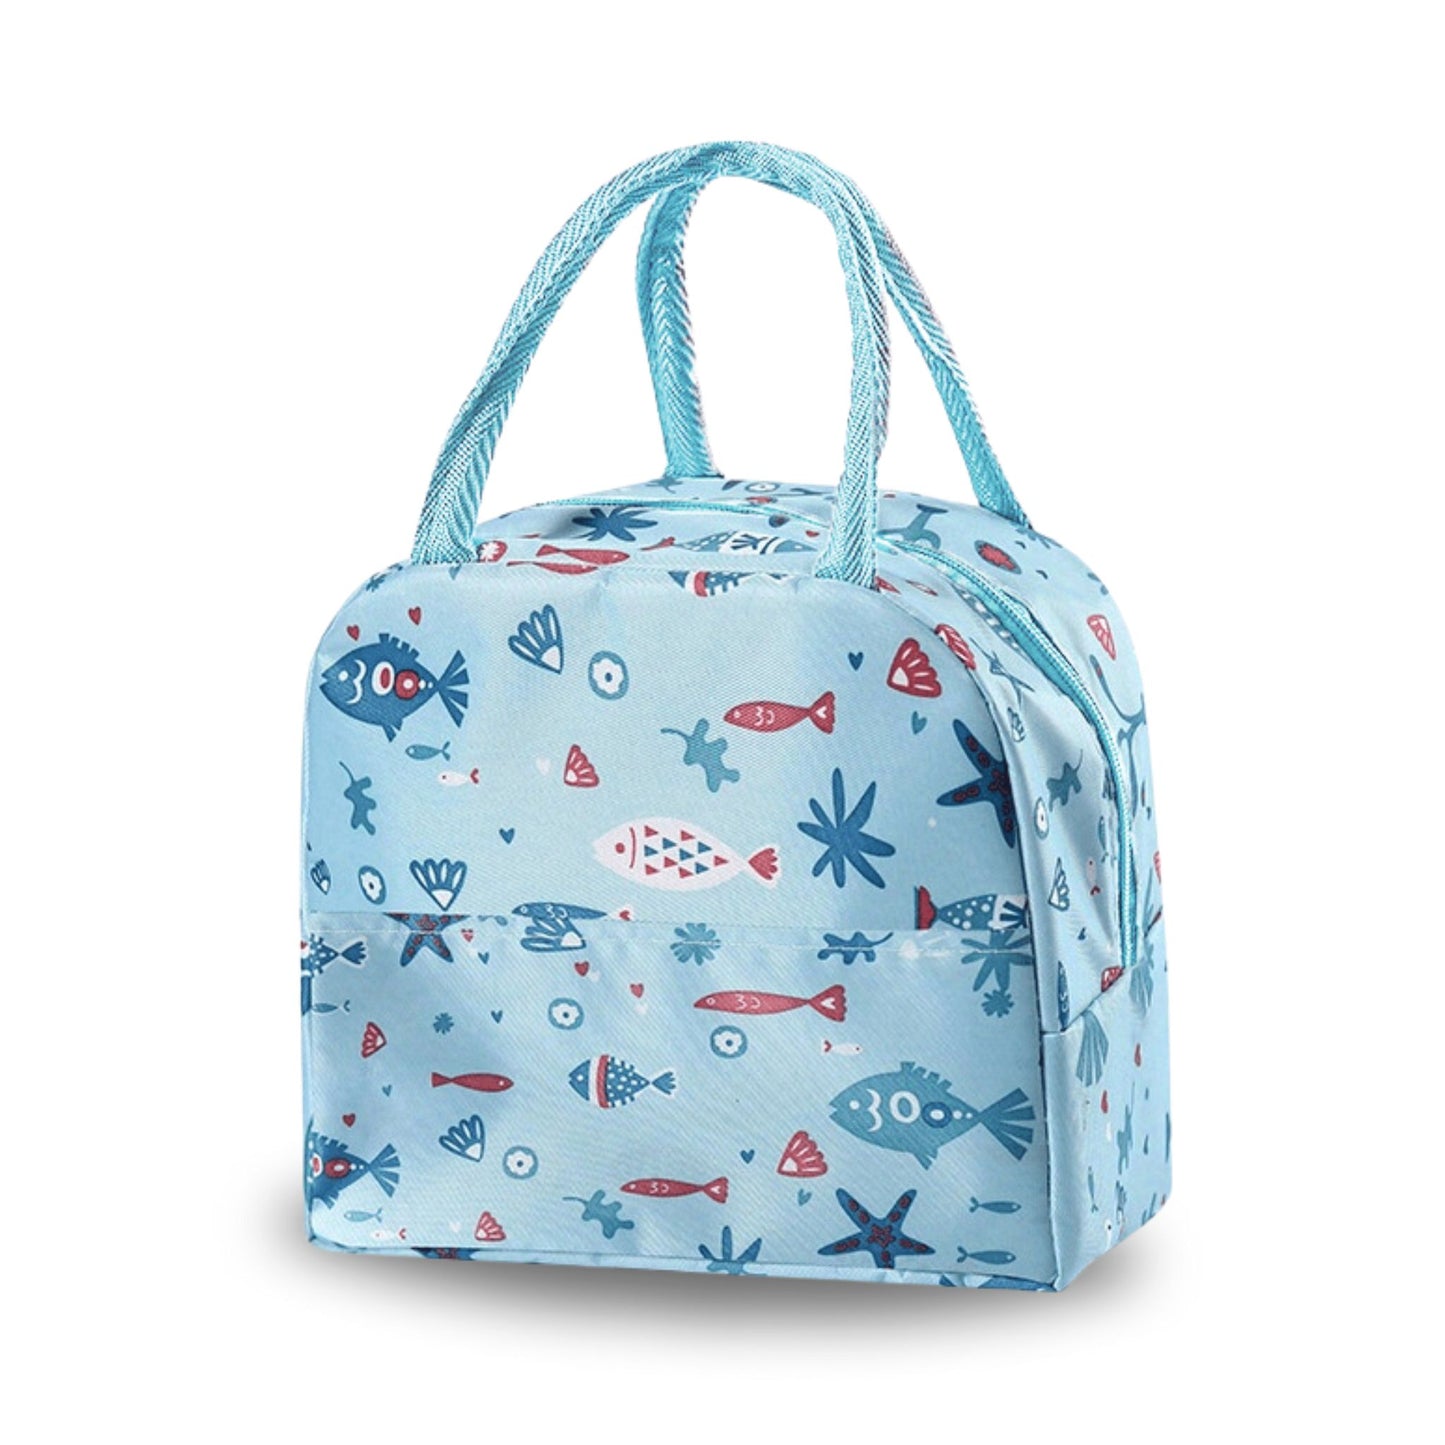 JM2305 Insulated Lunch Bag